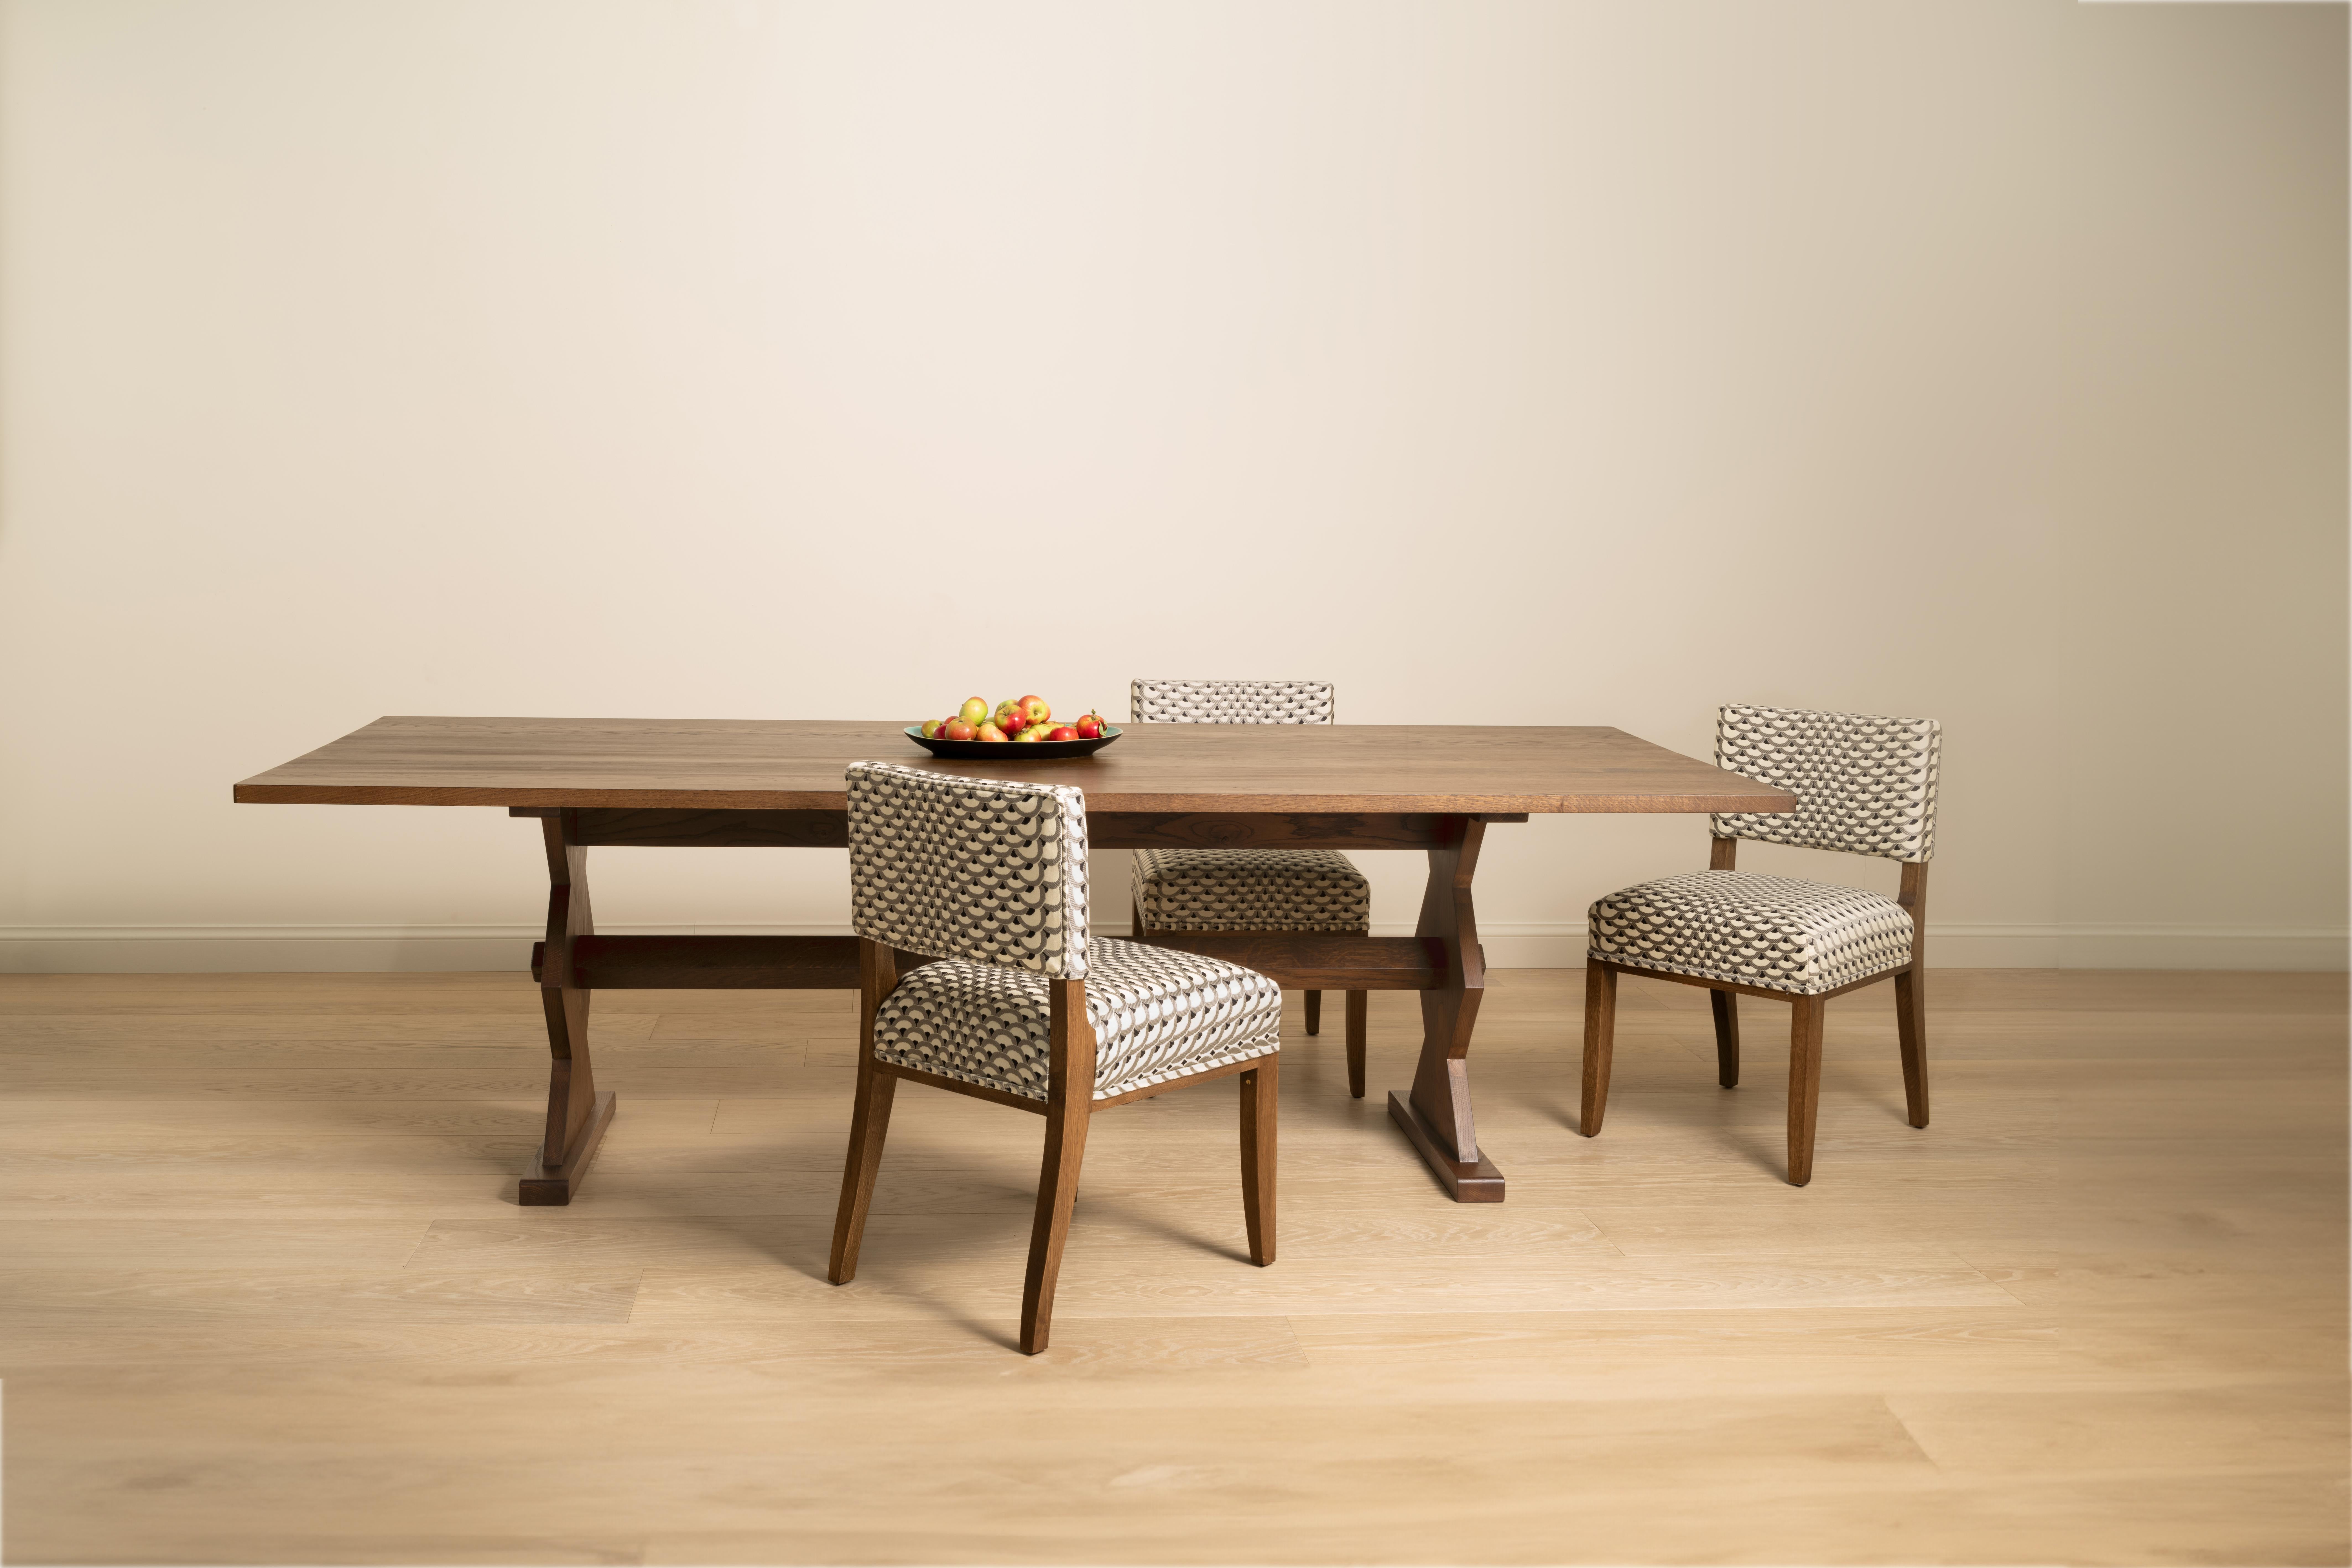 A contemporary country dining table with geometrically shaped legs inspired by the designer Marcel Coard. Traditionally constructed in solid oak and available in a Light, Mid, Dark and Ebonised finish.
​
Available to view in our London showroom.